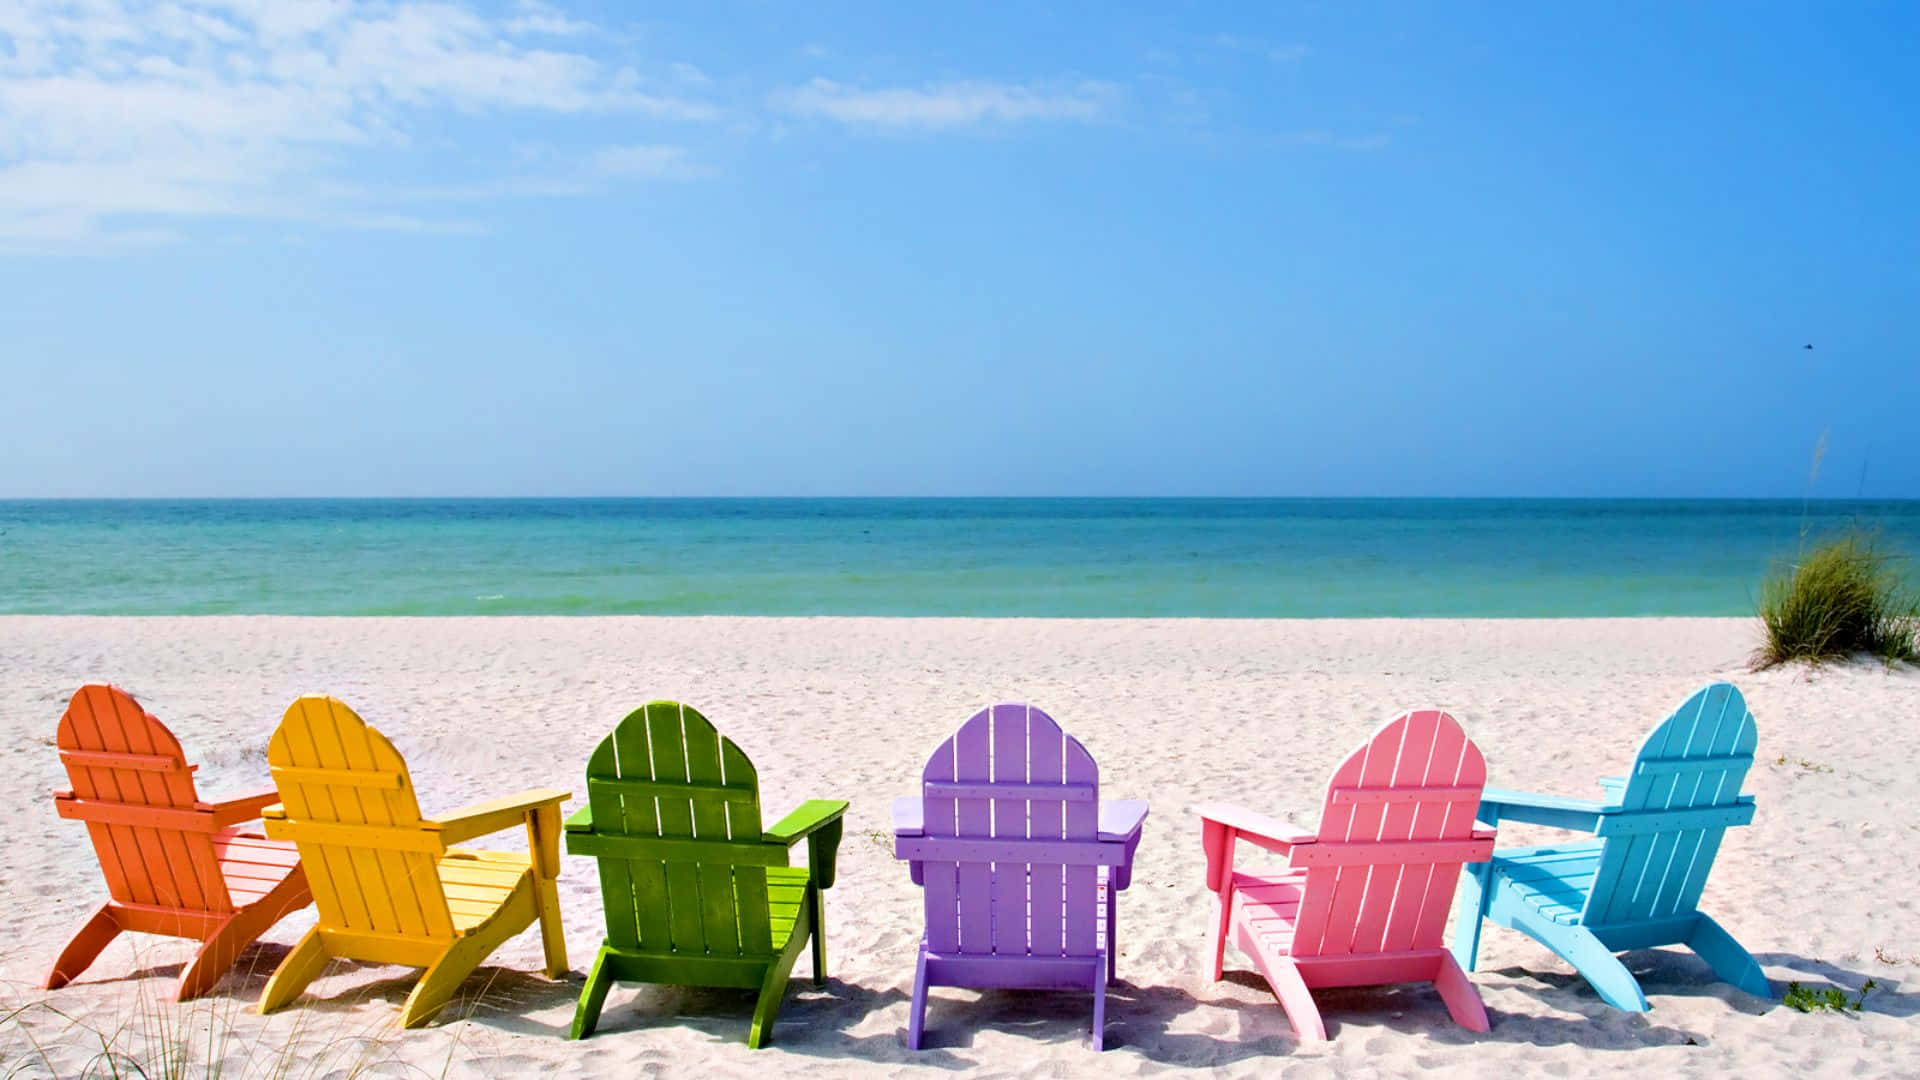 1920x1080 Summer Background Of Colorful Lounge Chairs